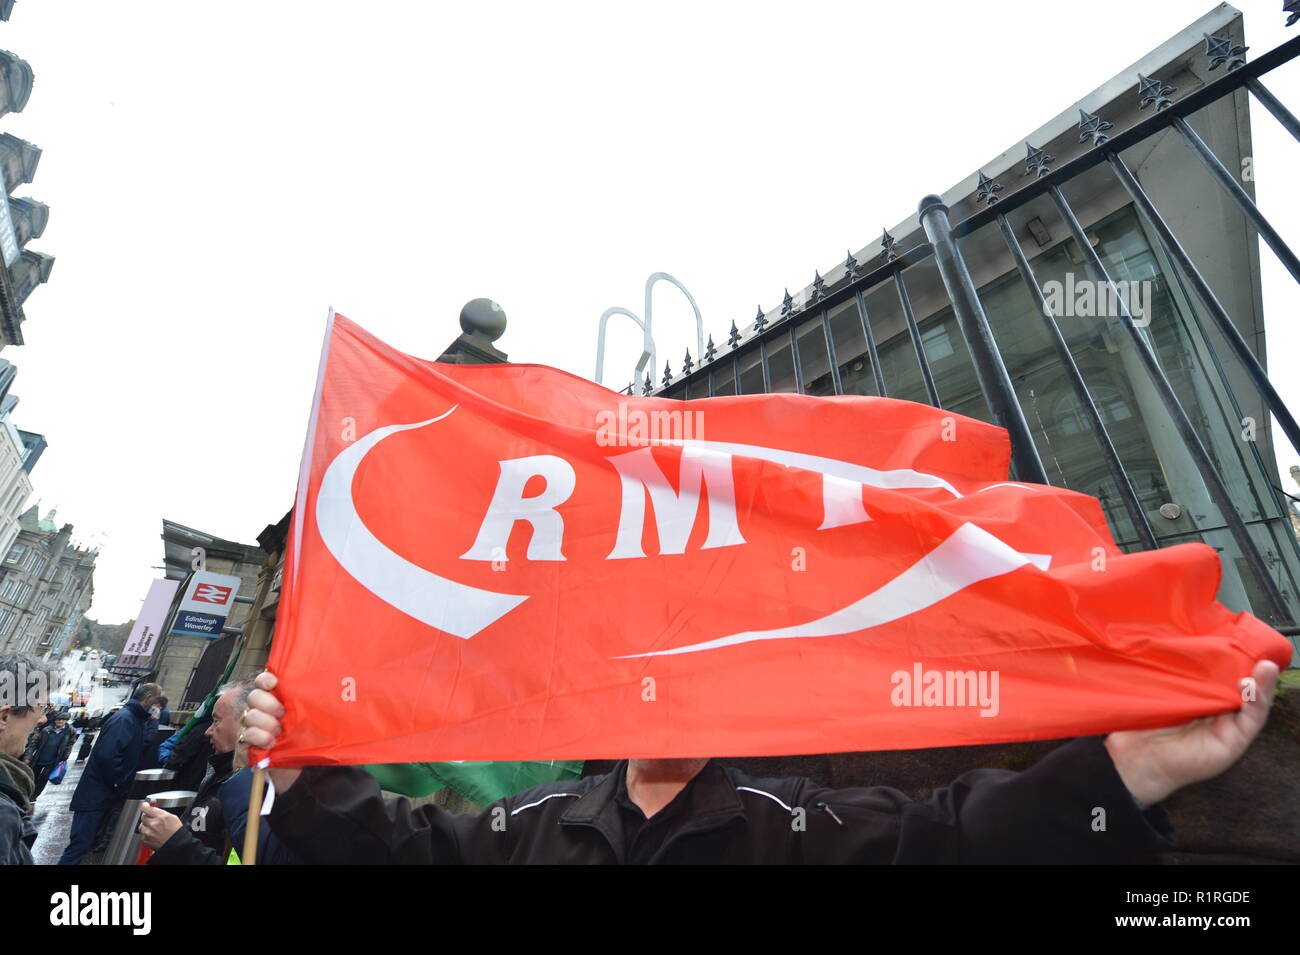 Edinburgh, UK. 14th Nov, 2018. RMT Union (National Union of Rail, Maritime and Transport Workers) members protests Ahead of a Holyrood vote calling for the ScotRail break clause to be exercised, Scottish Labour leader Richard Leonard and Transport spokesperson Colin Smyth campaign at Waverley station. Credit: Colin Fisher/Alamy Live News Stock Photo